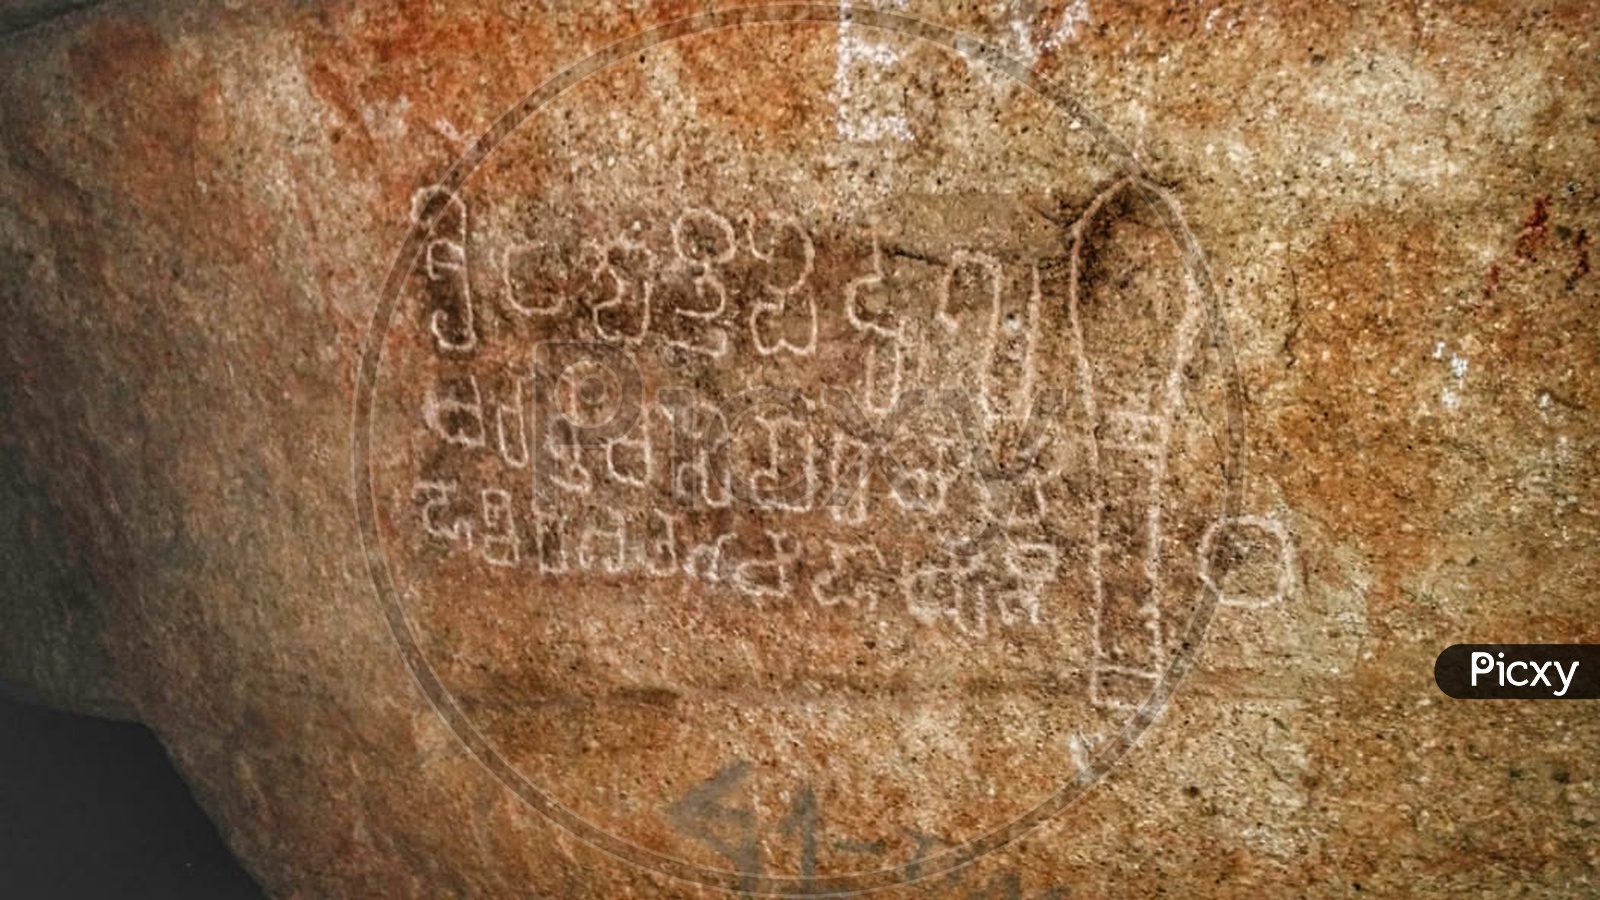 Ancient Writings On Stones